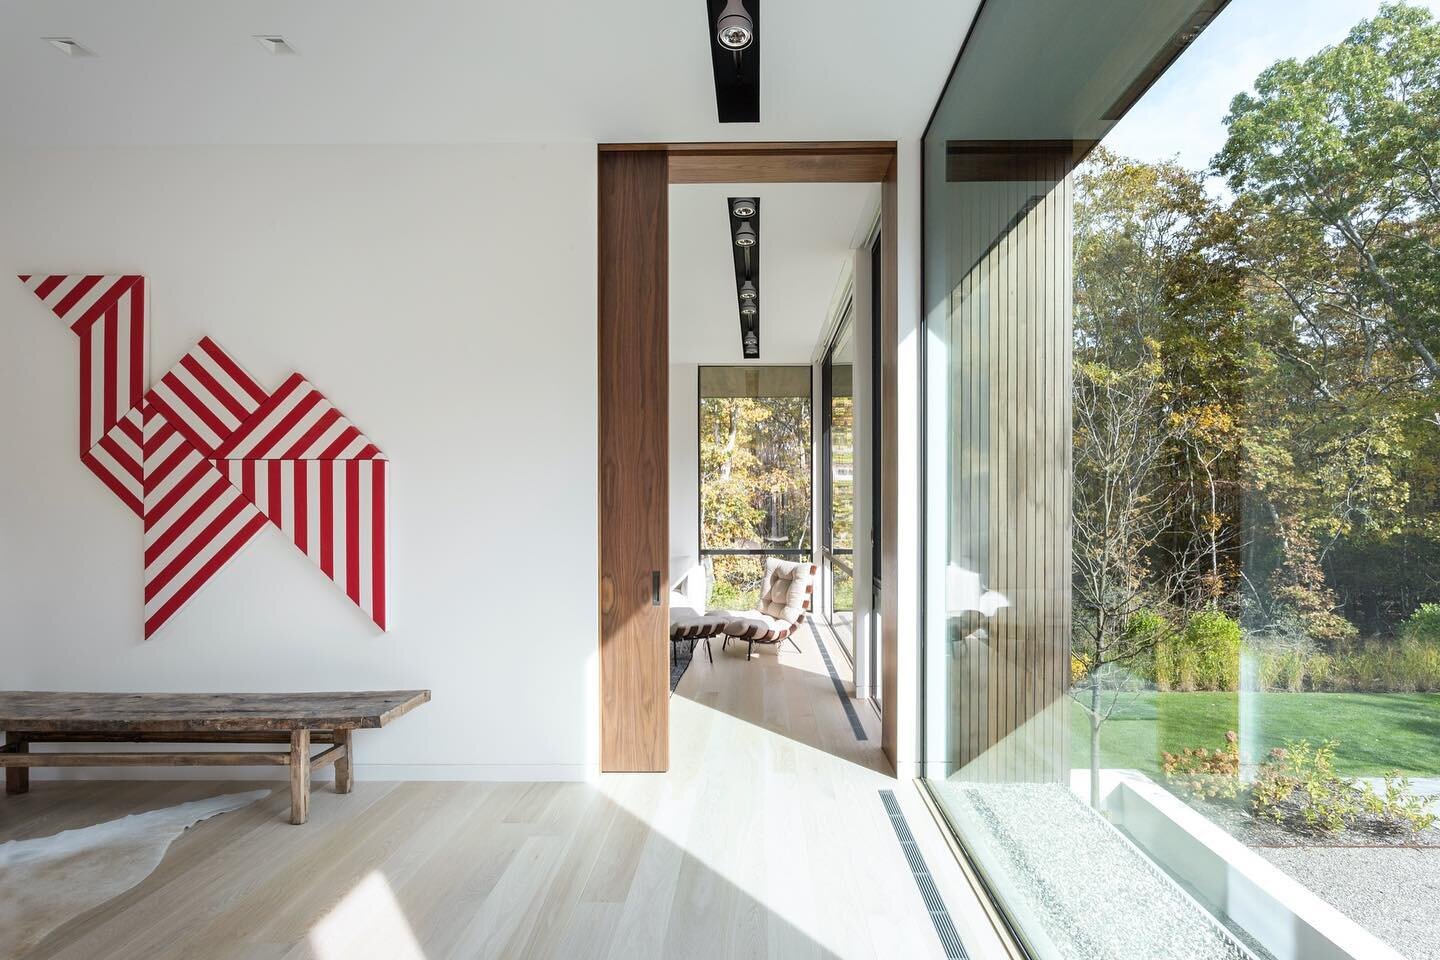 Blurring the lines between exterior and interior